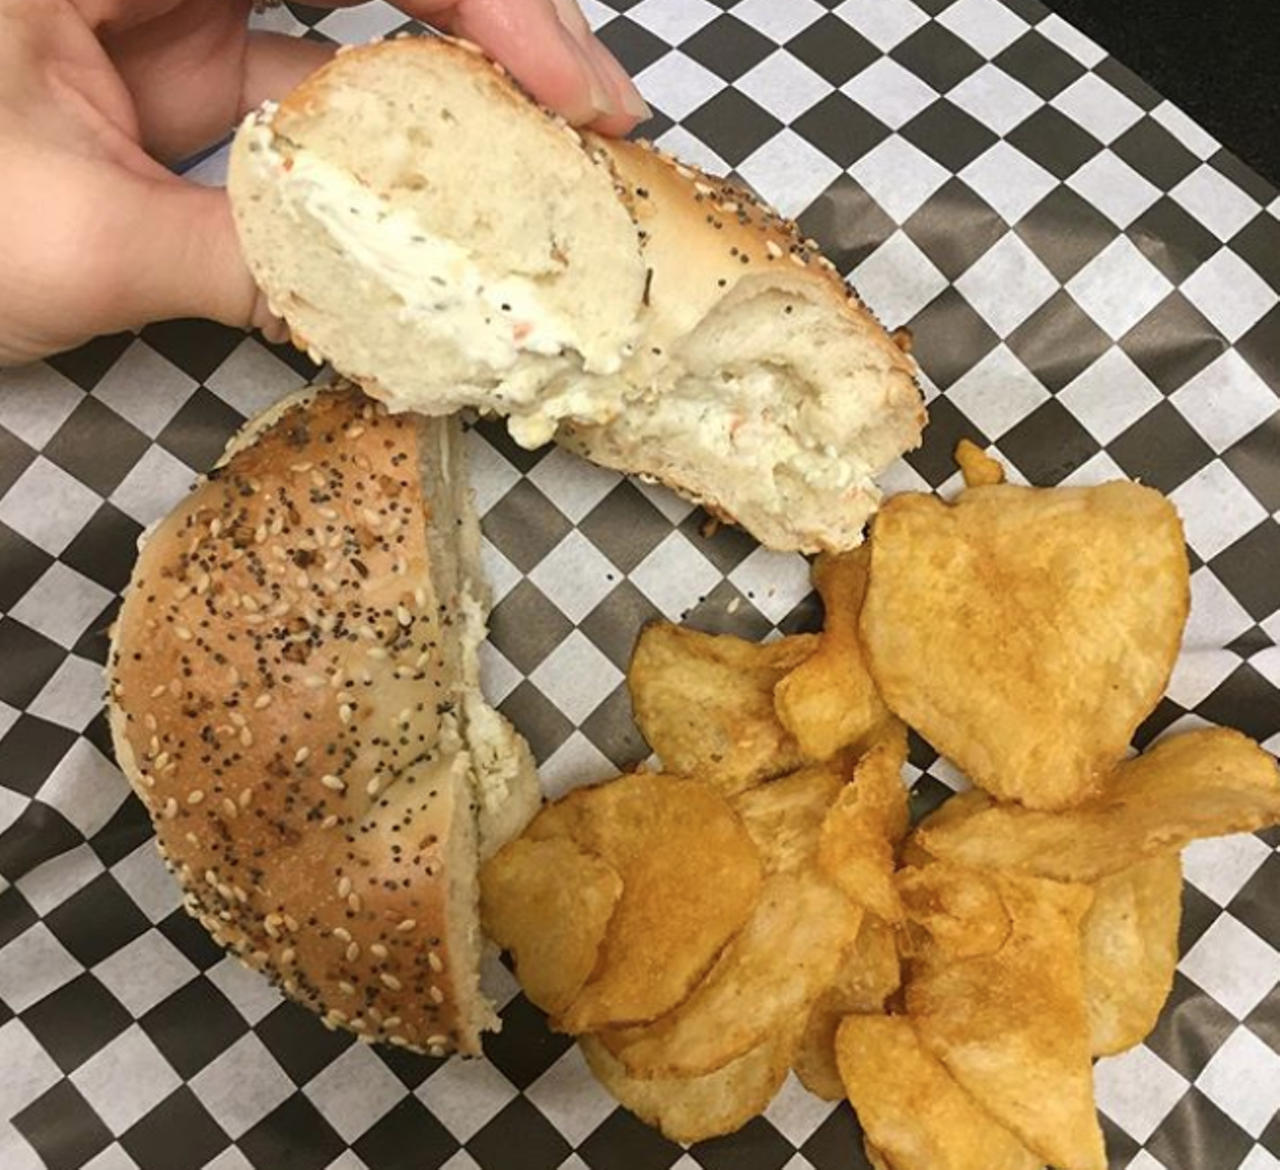 Chicago Bagel & Deli
10918 Wurzbach Rd. #132, (210) 691-2245
Single bagels are available for only 97 cents, or order them by half or full dozen. Flavors include garlic, onion, poppy, pumpernickel, egg, blueberry and plenty more. Toppings include butter, jelly, honey, butter or the ever-classic plain cream cheese.
Photo via Instagram / sarah.baade